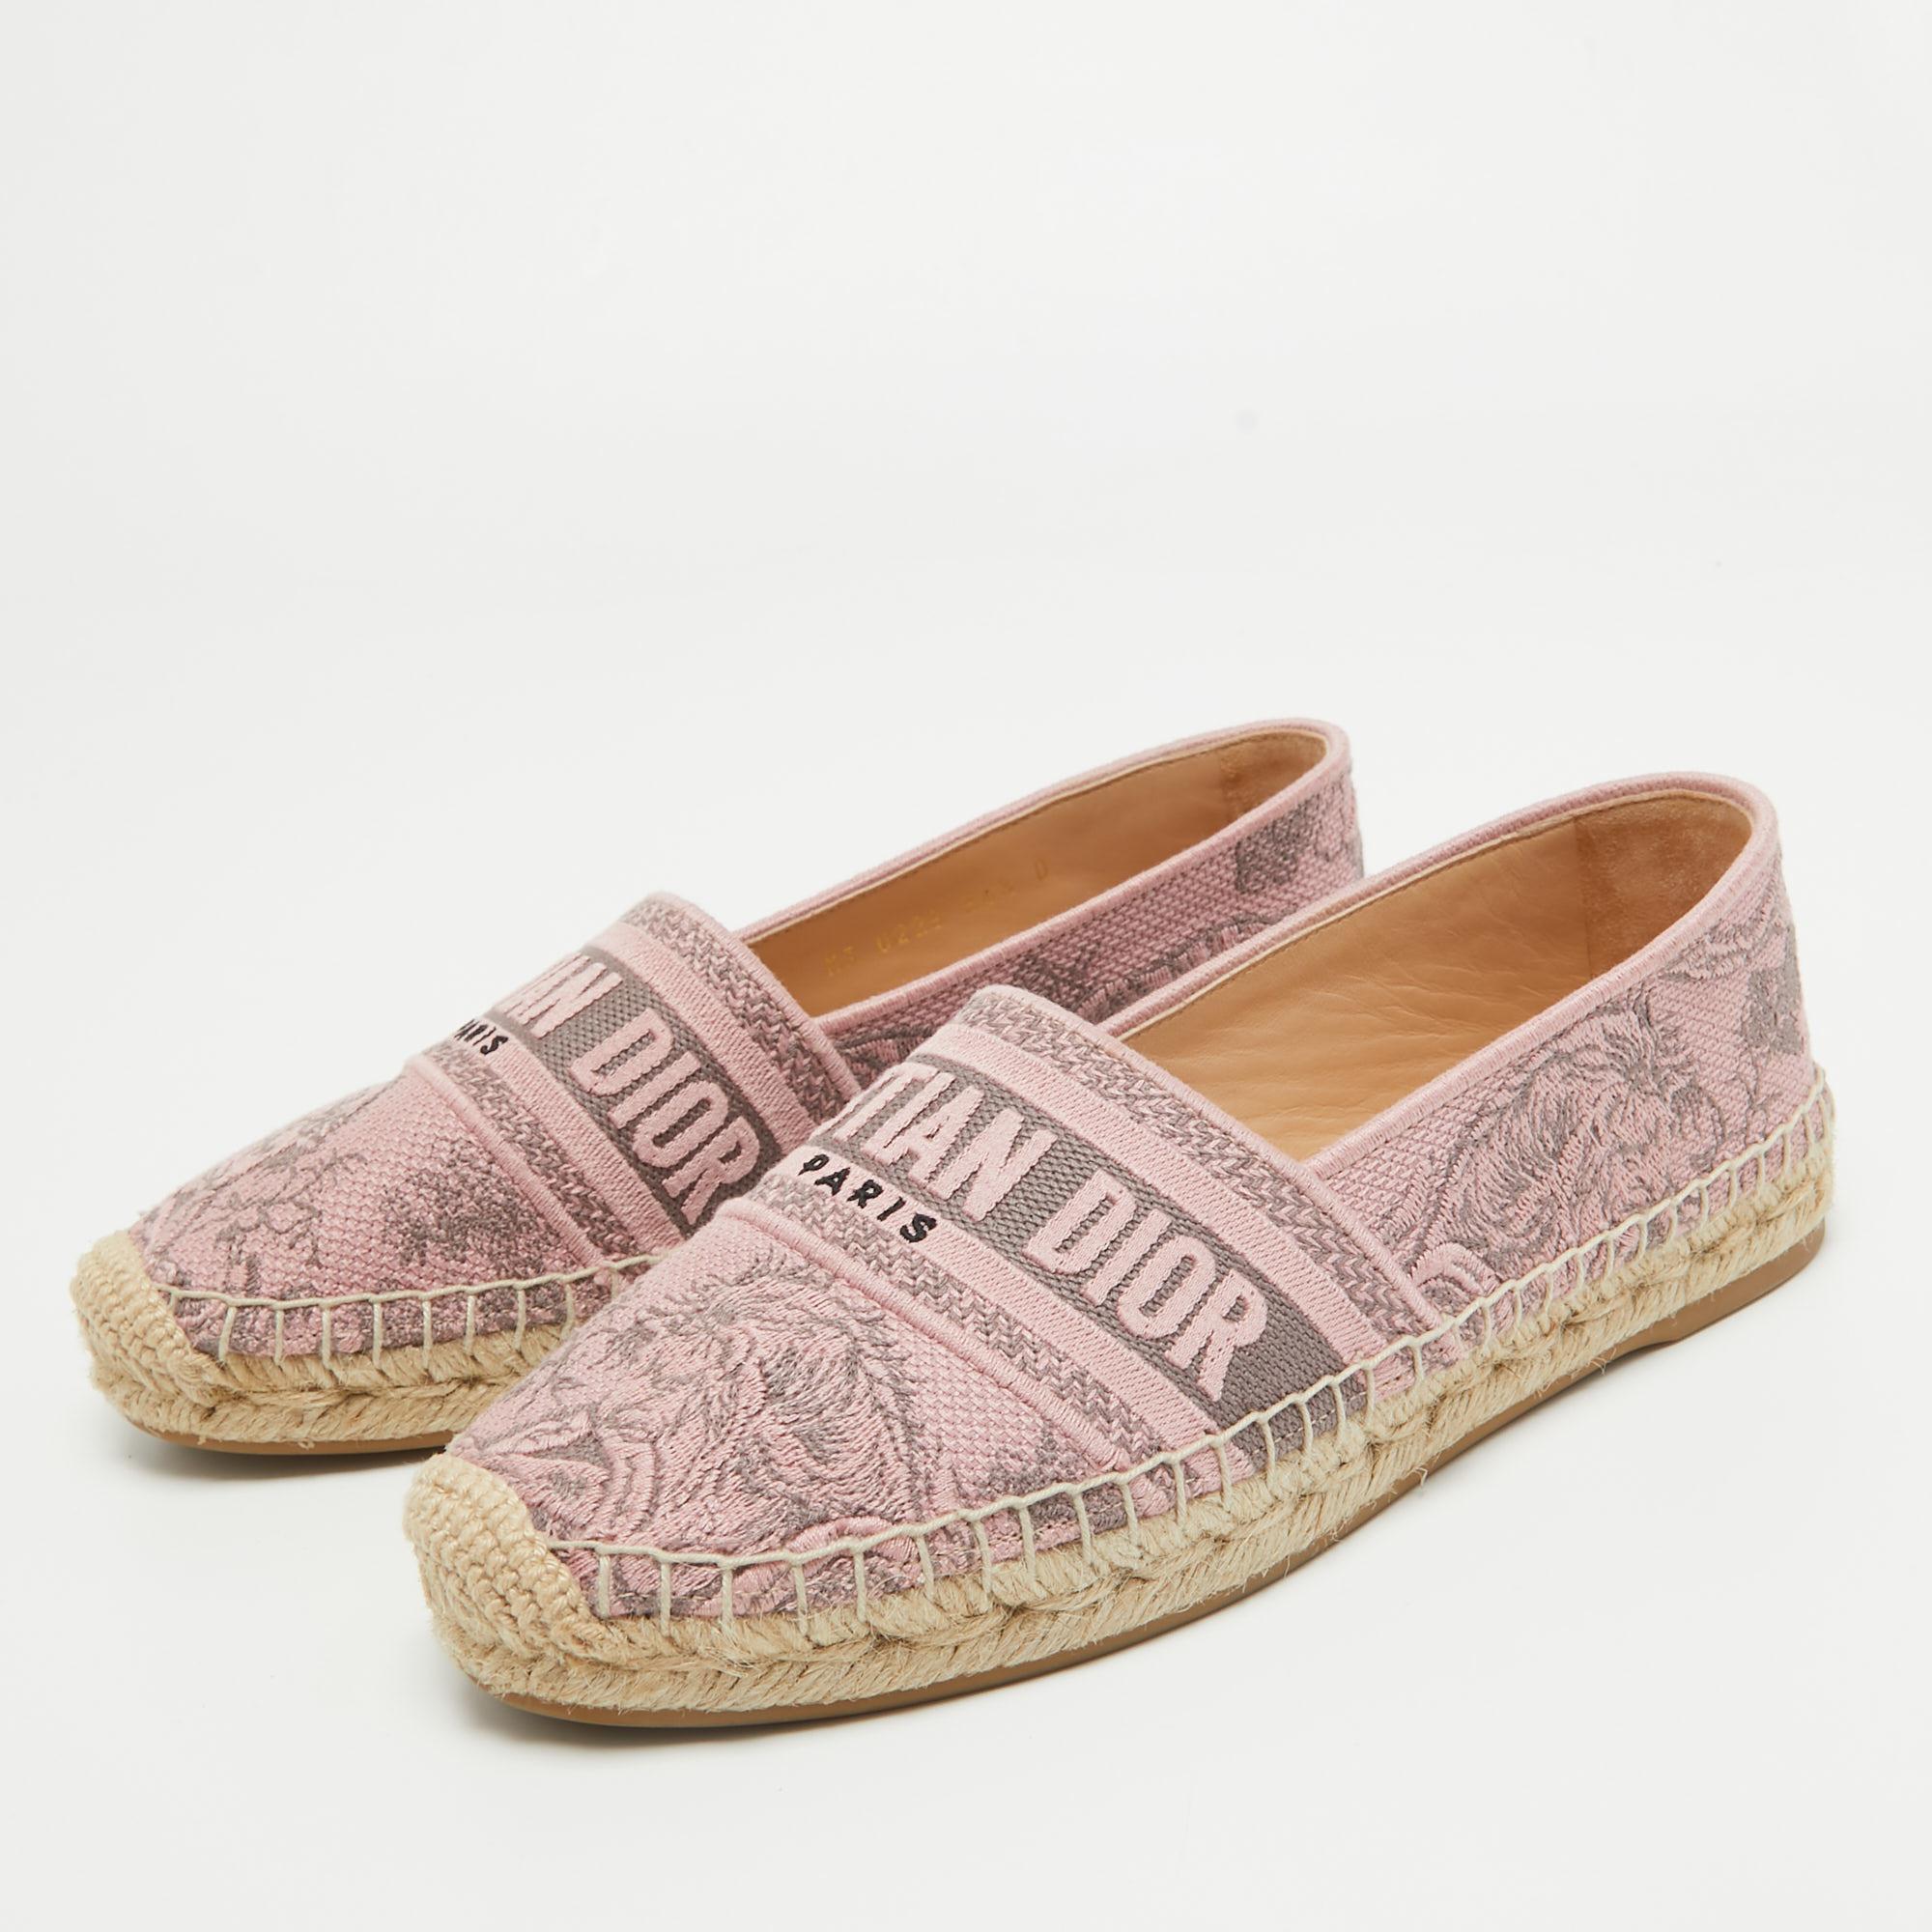 Dior Pink/Grey Embroidered Canvas Granville Espadrille Flats Size 36.5 4